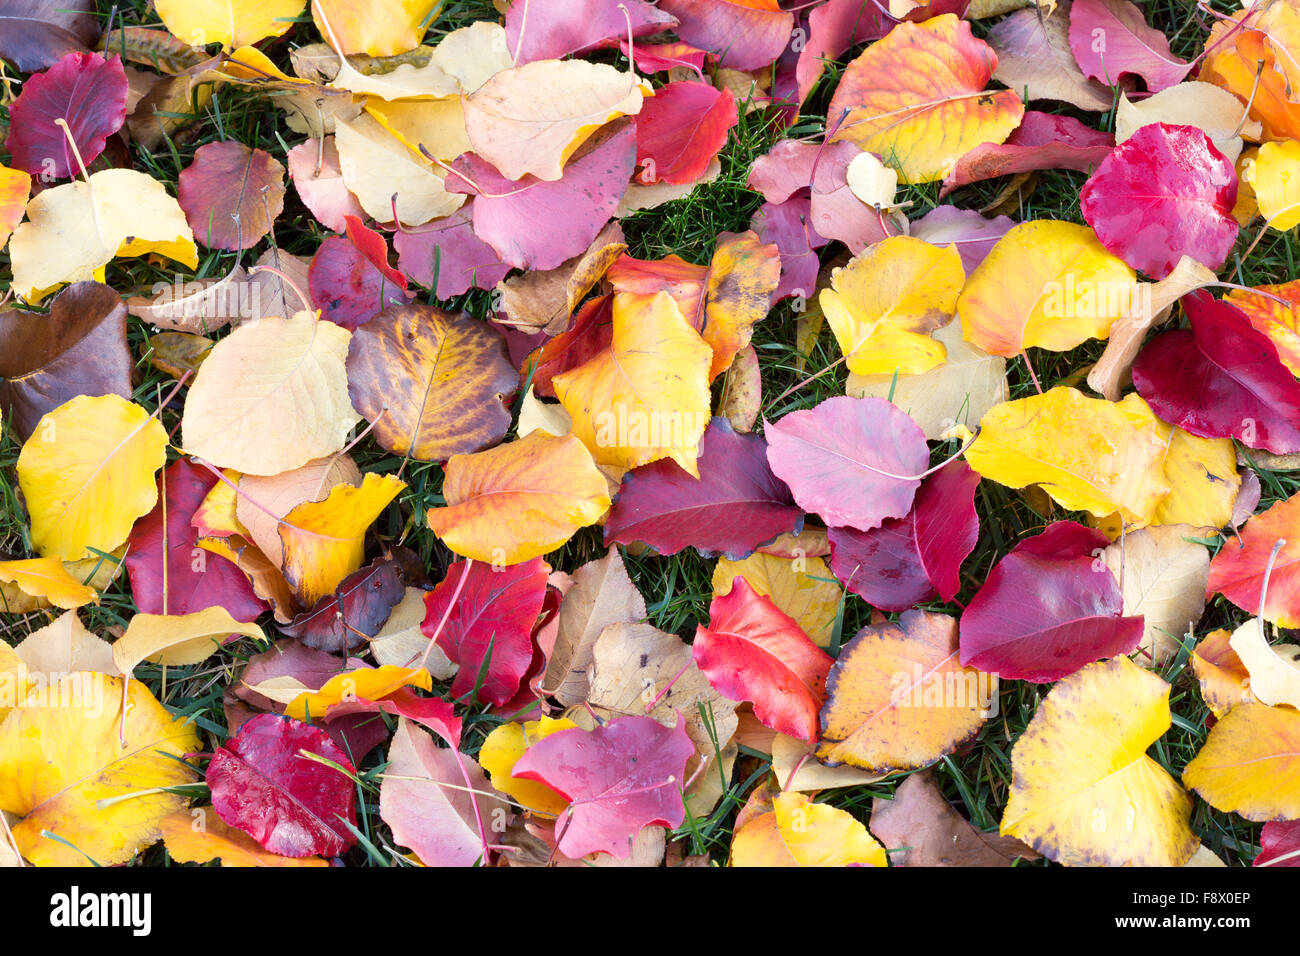 Many colors of Fall Stock Photo